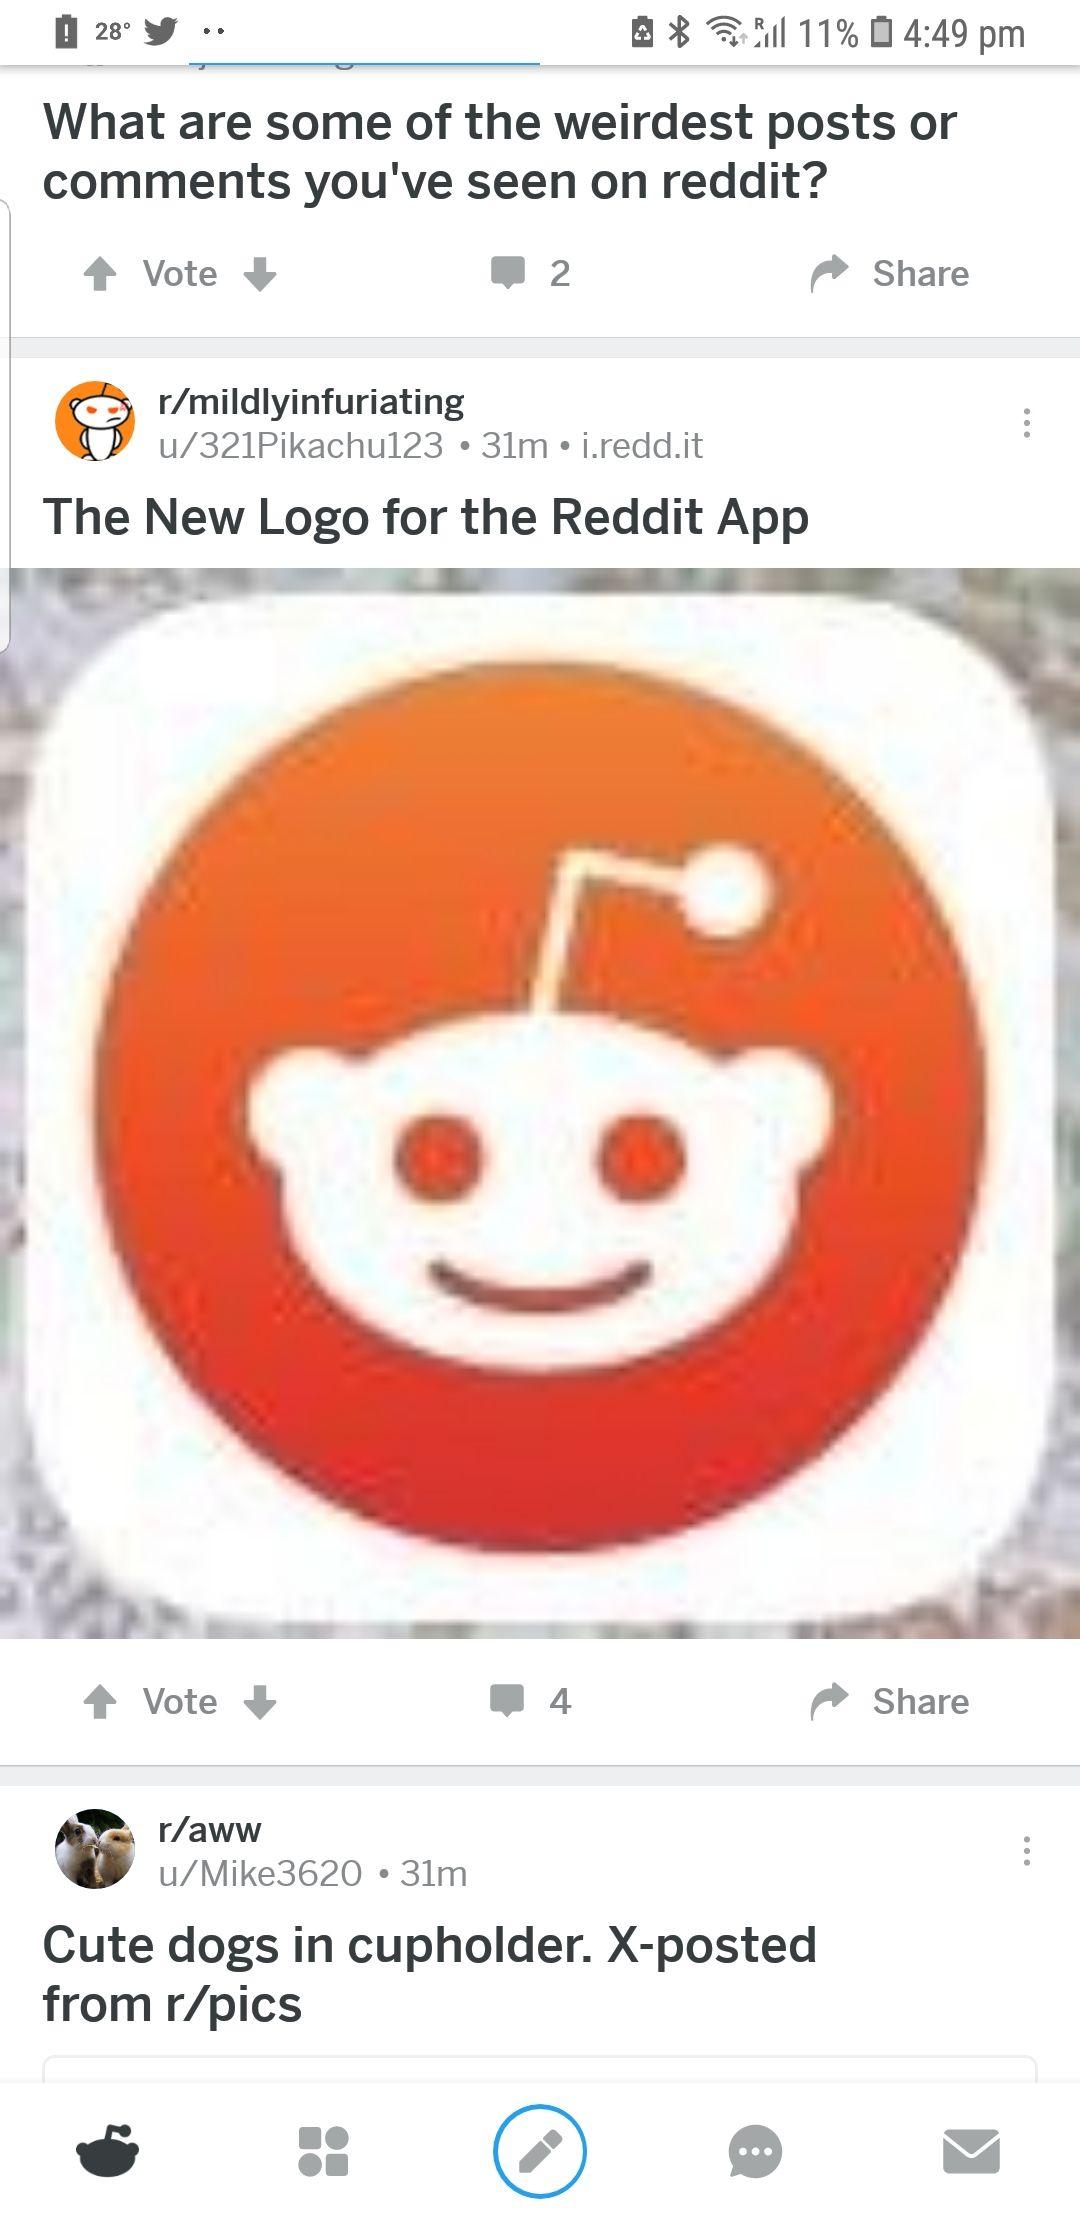 Reddit App Logo - Everyone posting about the new reddit app icon on this subreddit